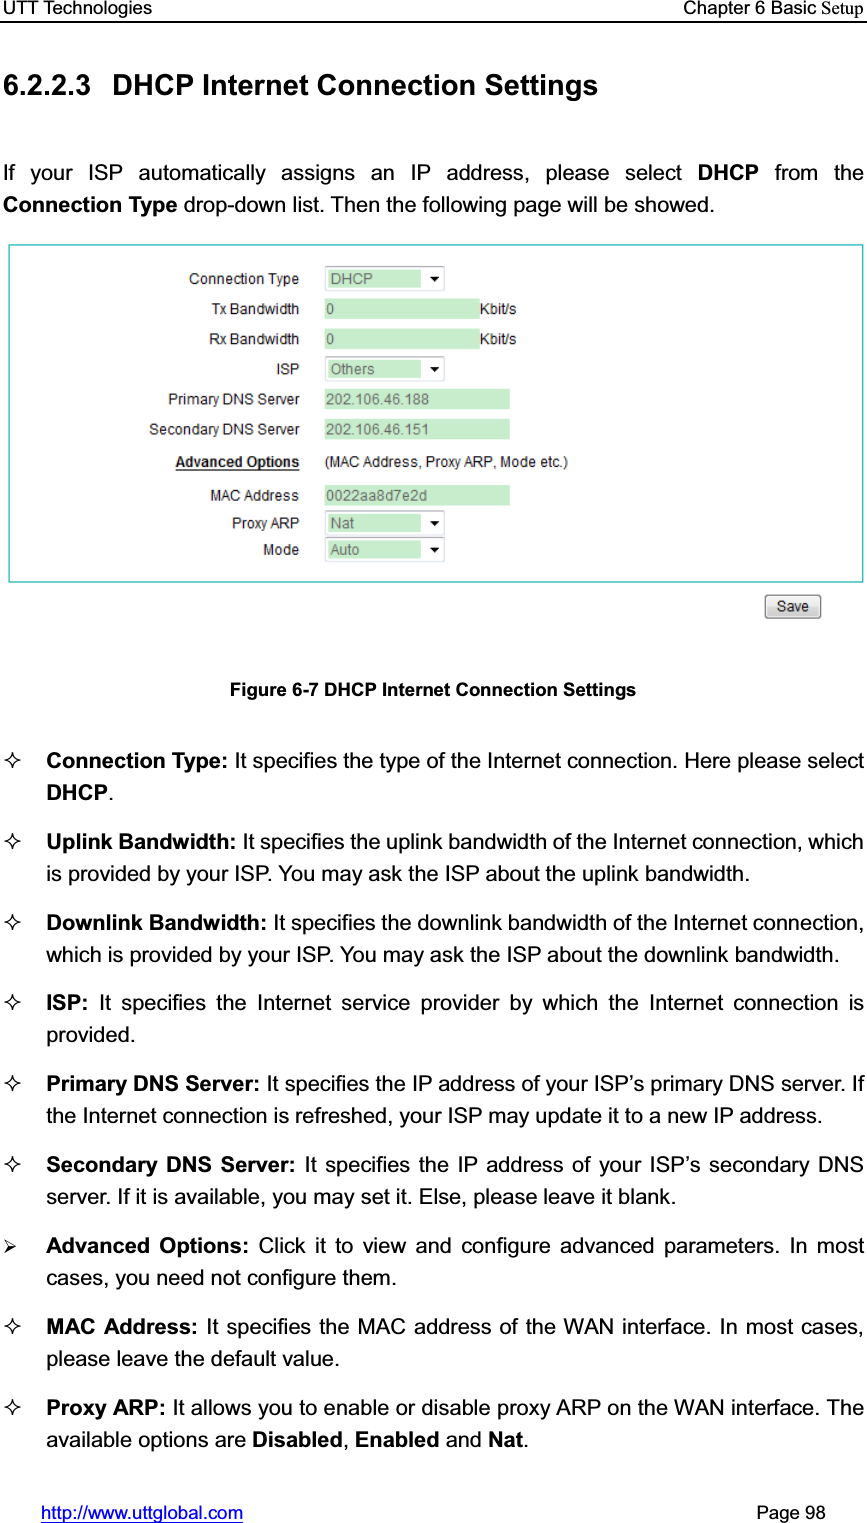 UTT Technologies    Chapter 6 Basic Setuphttp://www.uttglobal.com                                                       Page 98 6.2.2.3  DHCP Internet Connection Settings If your ISP automatically assigns an IP address, please select DHCP from the Connection Type drop-down list. Then the following page will be showed. Figure 6-7 DHCP Internet Connection Settings Connection Type: It specifies the type of the Internet connection. Here please select DHCP.Uplink Bandwidth: It specifies the uplink bandwidth of the Internet connection, which is provided by your ISP. You may ask the ISP about the uplink bandwidth. Downlink Bandwidth: It specifies the downlink bandwidth of the Internet connection, which is provided by your ISP. You may ask the ISP about the downlink bandwidth. ISP: It specifies the Internet service provider by which the Internet connection is provided. Primary DNS Server: It specifies WKH,3DGGUHVVRI\RXU,63¶VSULPDU\&apos;16server. If the Internet connection is refreshed, your ISP may update it to a new IP address.Secondary DNS Server: It specifies the IP address of your ISP¶s secondary DNS server. If it is available, you may set it. Else, please leave it blank.¾Advanced Options: Click it to view and configure advanced parameters. In most cases, you need not configure them. MAC Address: It specifies the MAC address of the WAN interface. In most cases, please leave the default value. Proxy ARP: It allows you to enable or disable proxy ARP on the WAN interface. The available options are Disabled,Enabled and Nat.